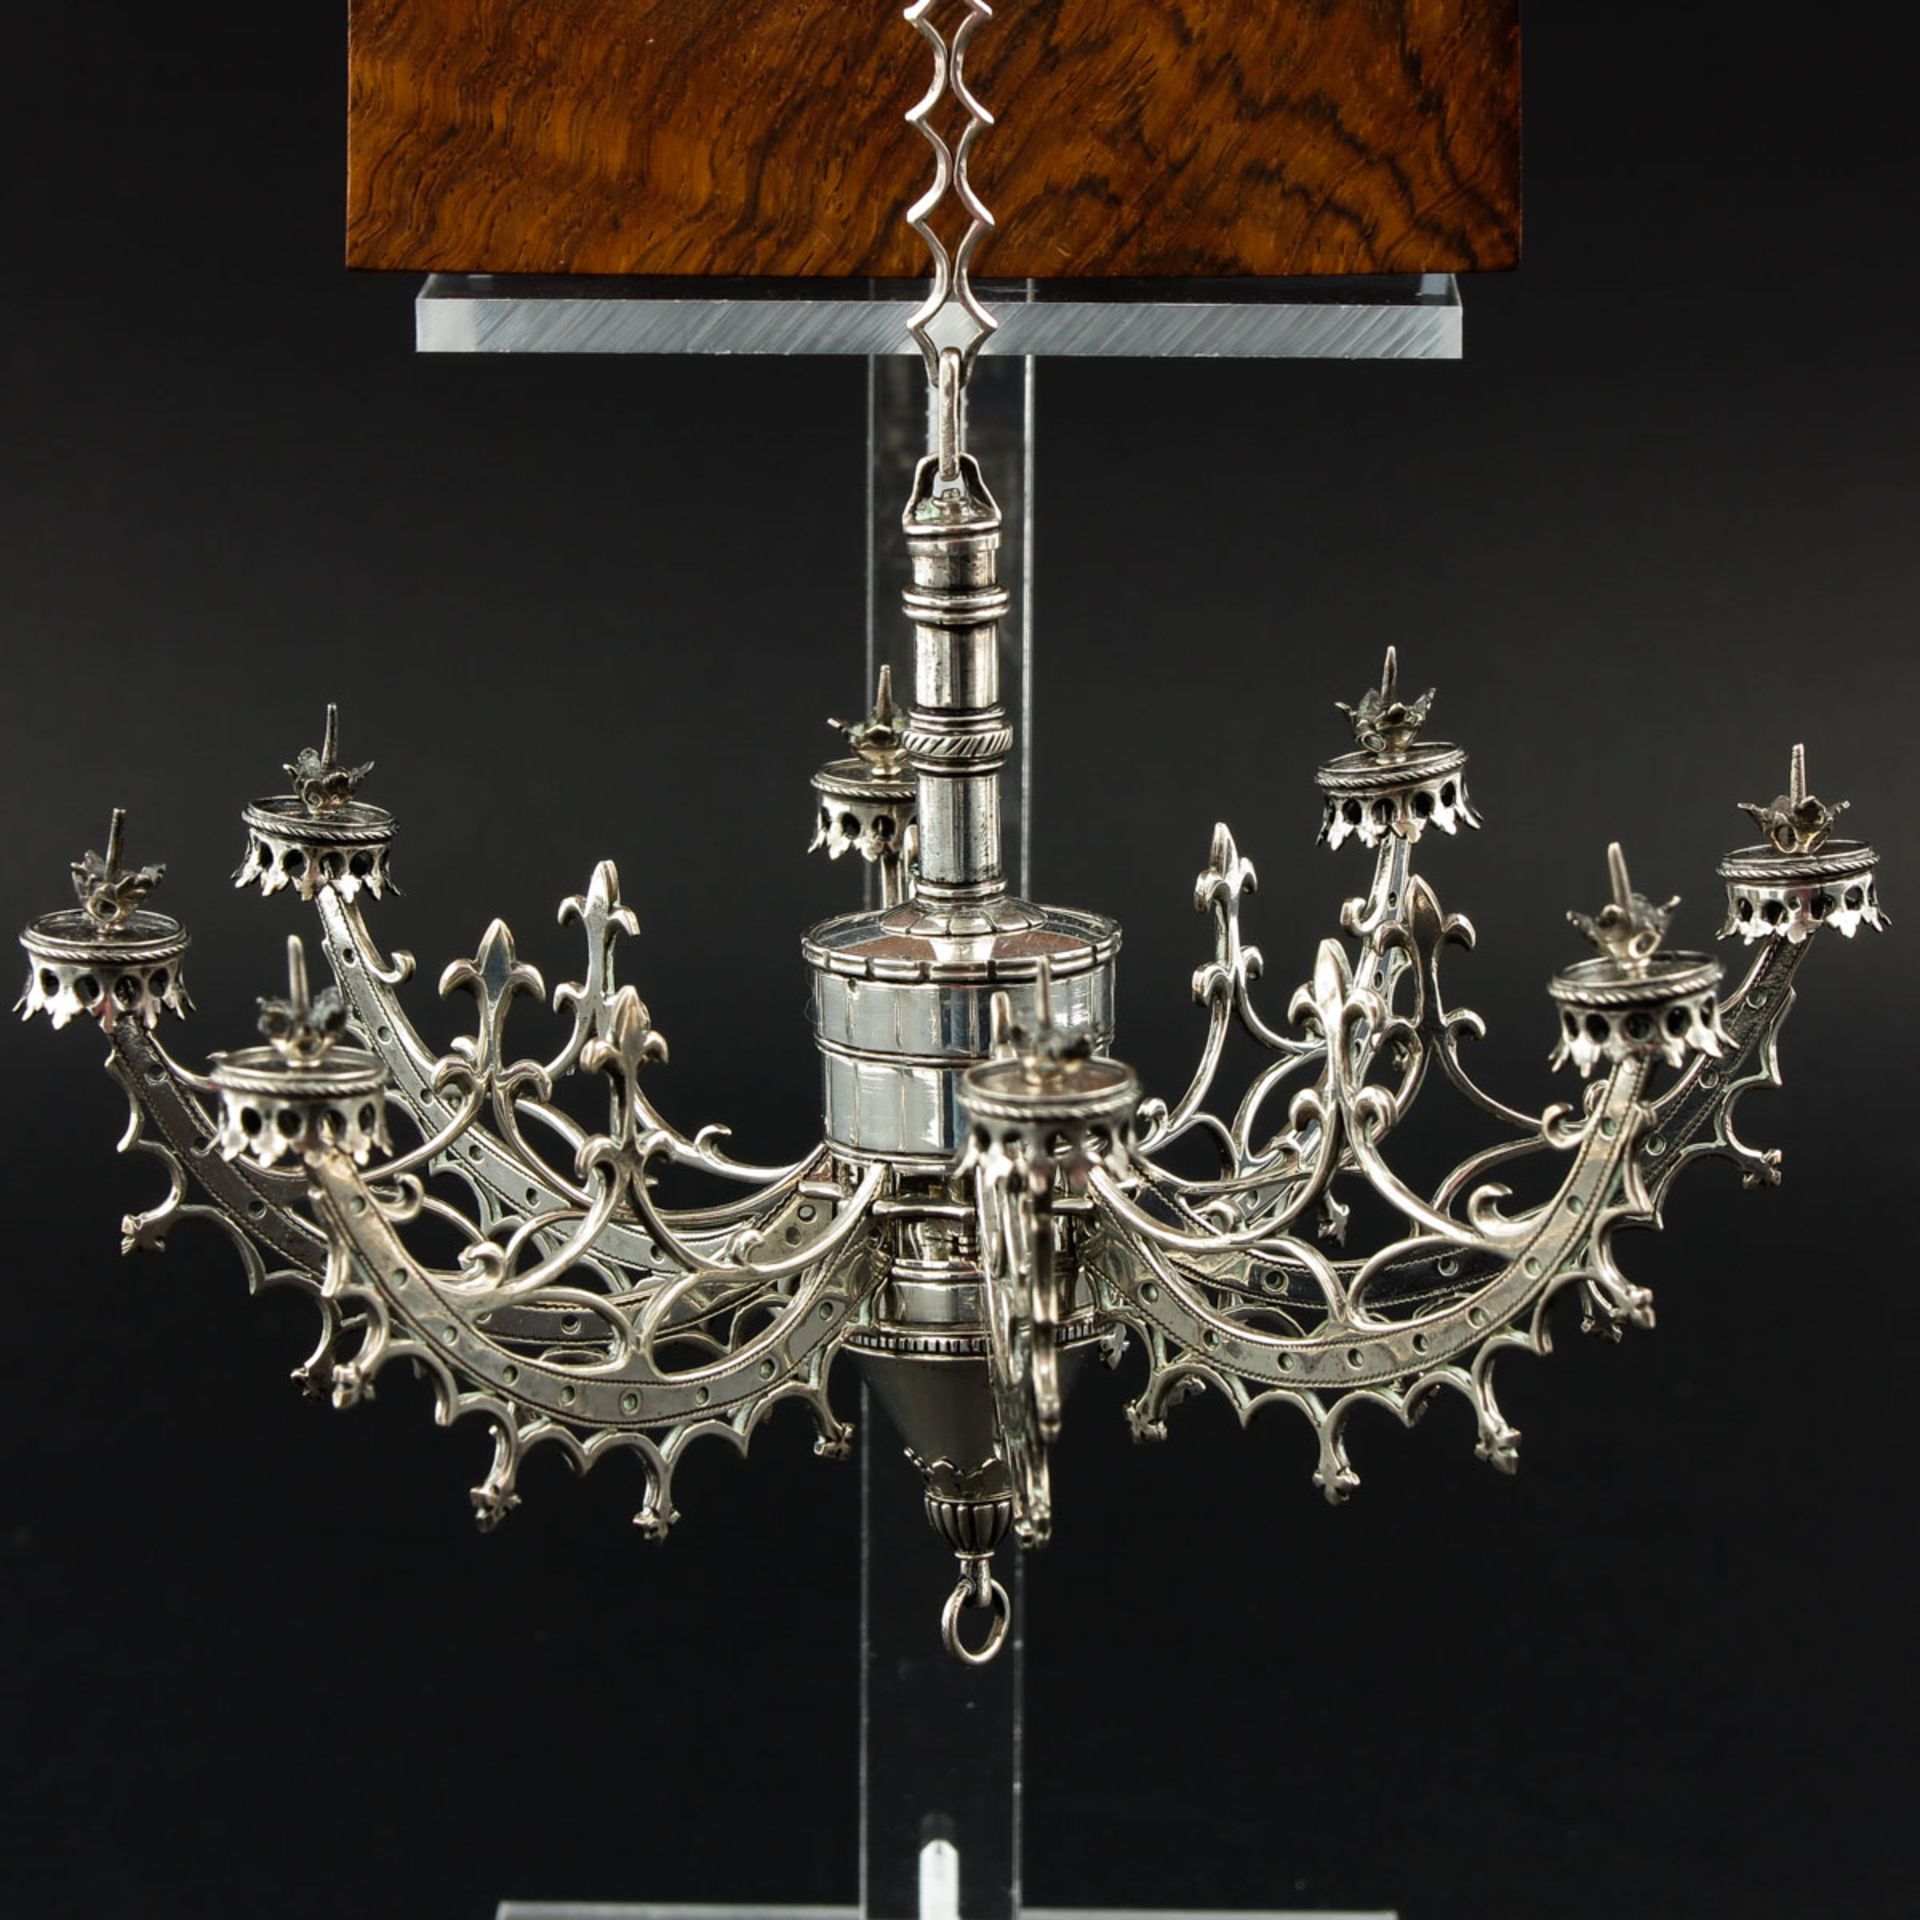 A Very Rare Miniature Chandelier - Image 2 of 9